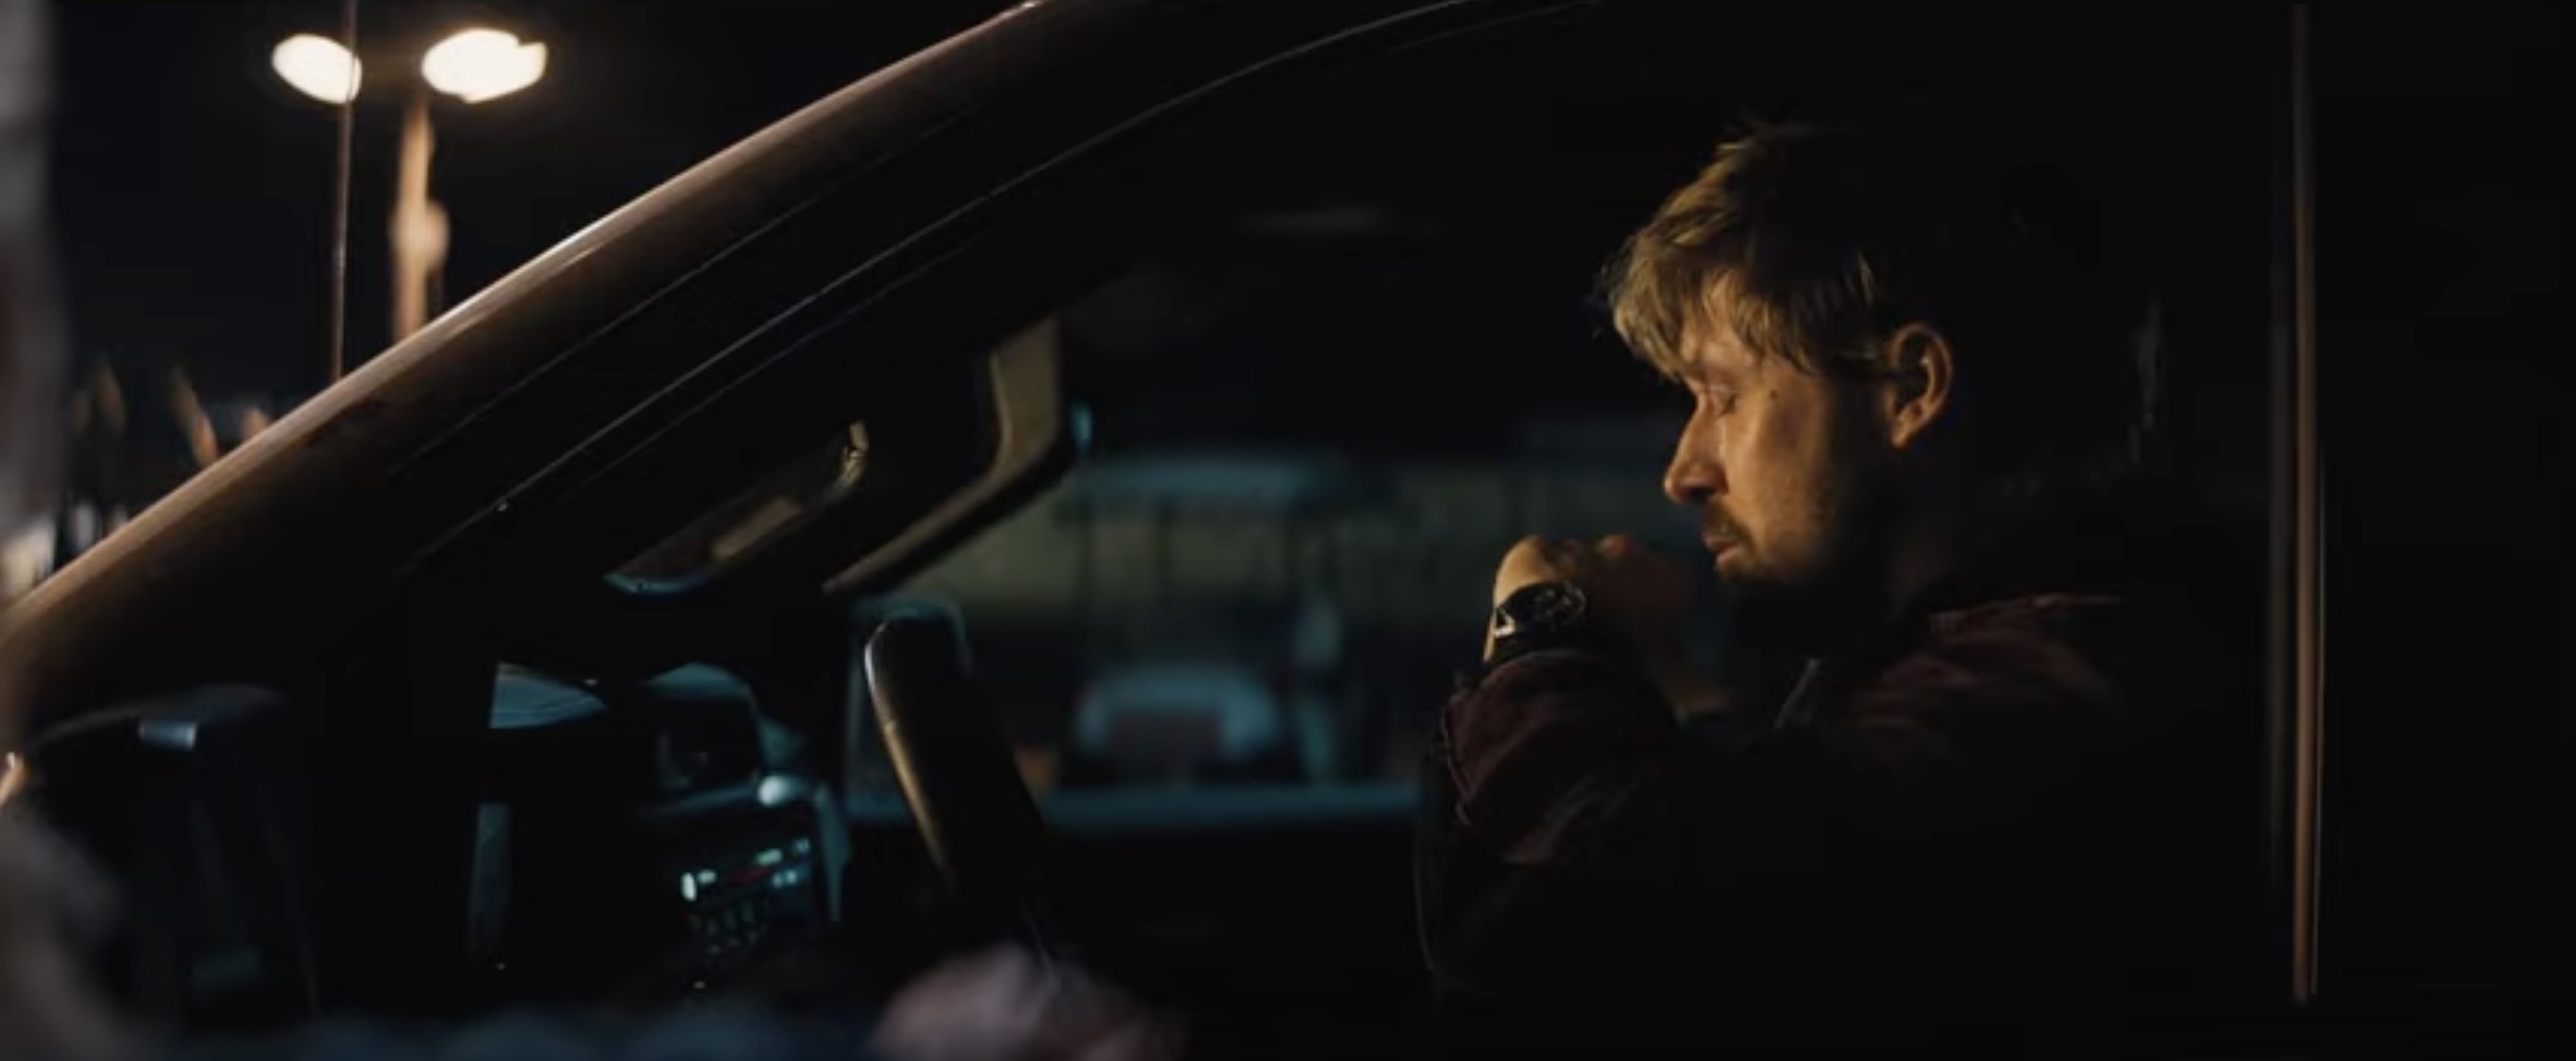 Colt Seavers (Ryan Gosling) quietly weeps while listening to Taylor Swift in the trailer for "The Fall Guy."